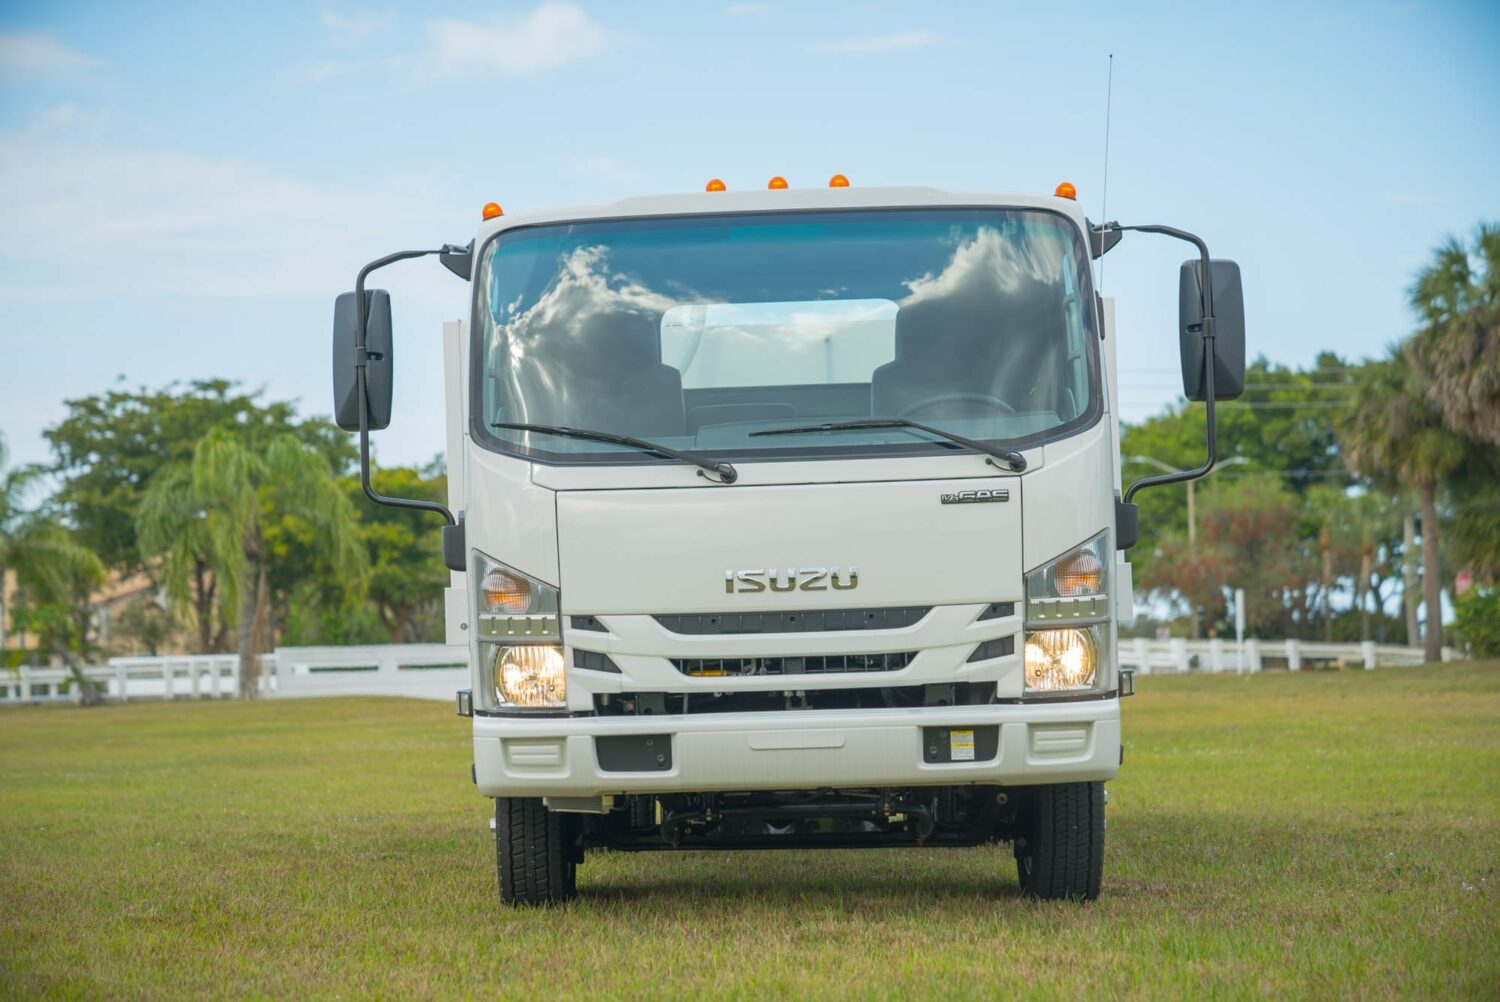 Used Commercial Trucks For Sale In Florida